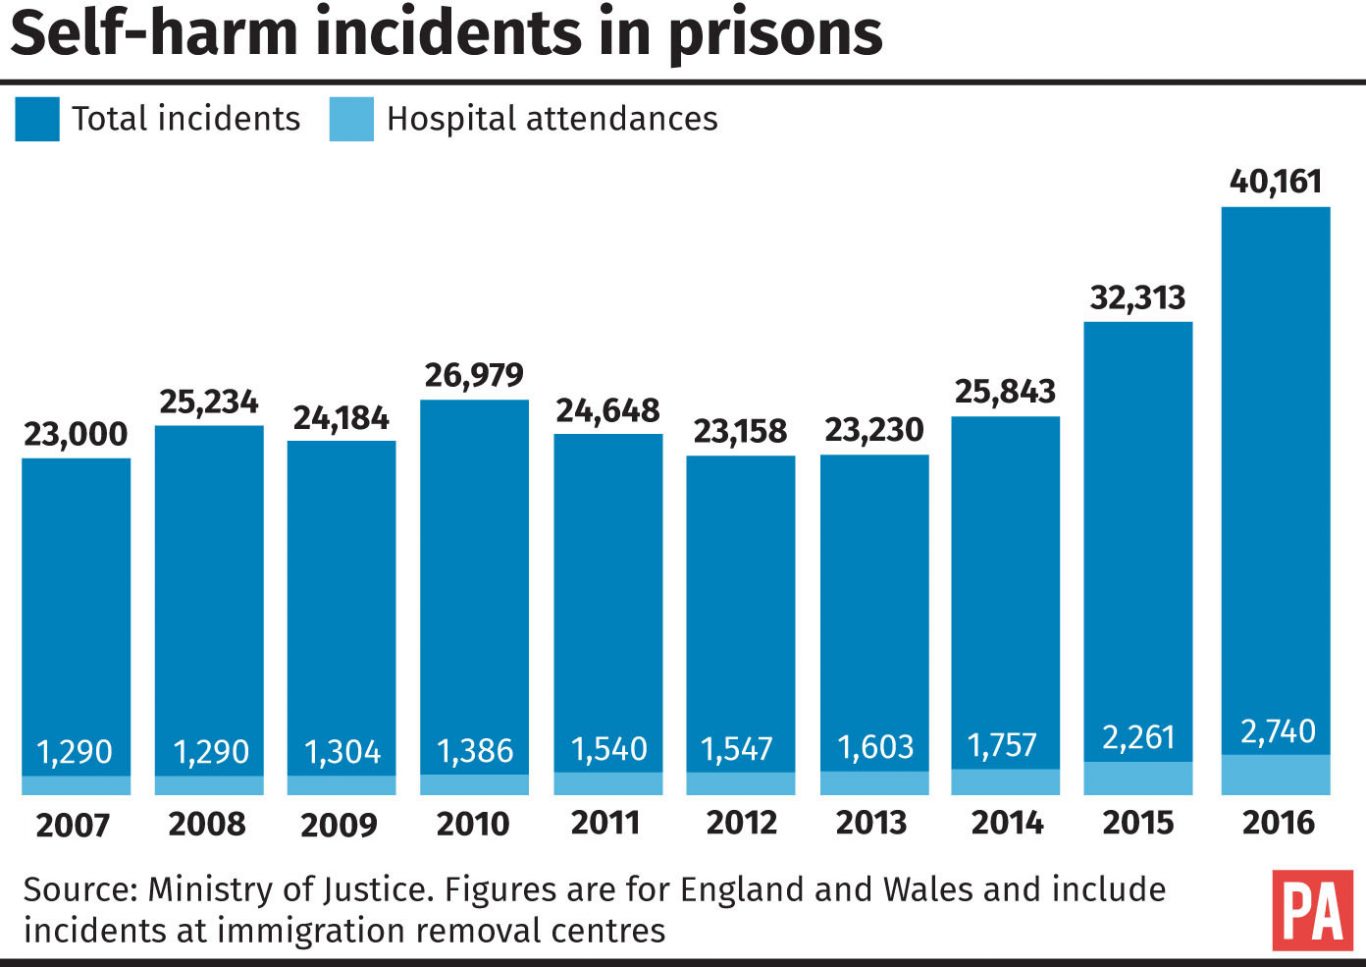 Self-harm incidents in prisons